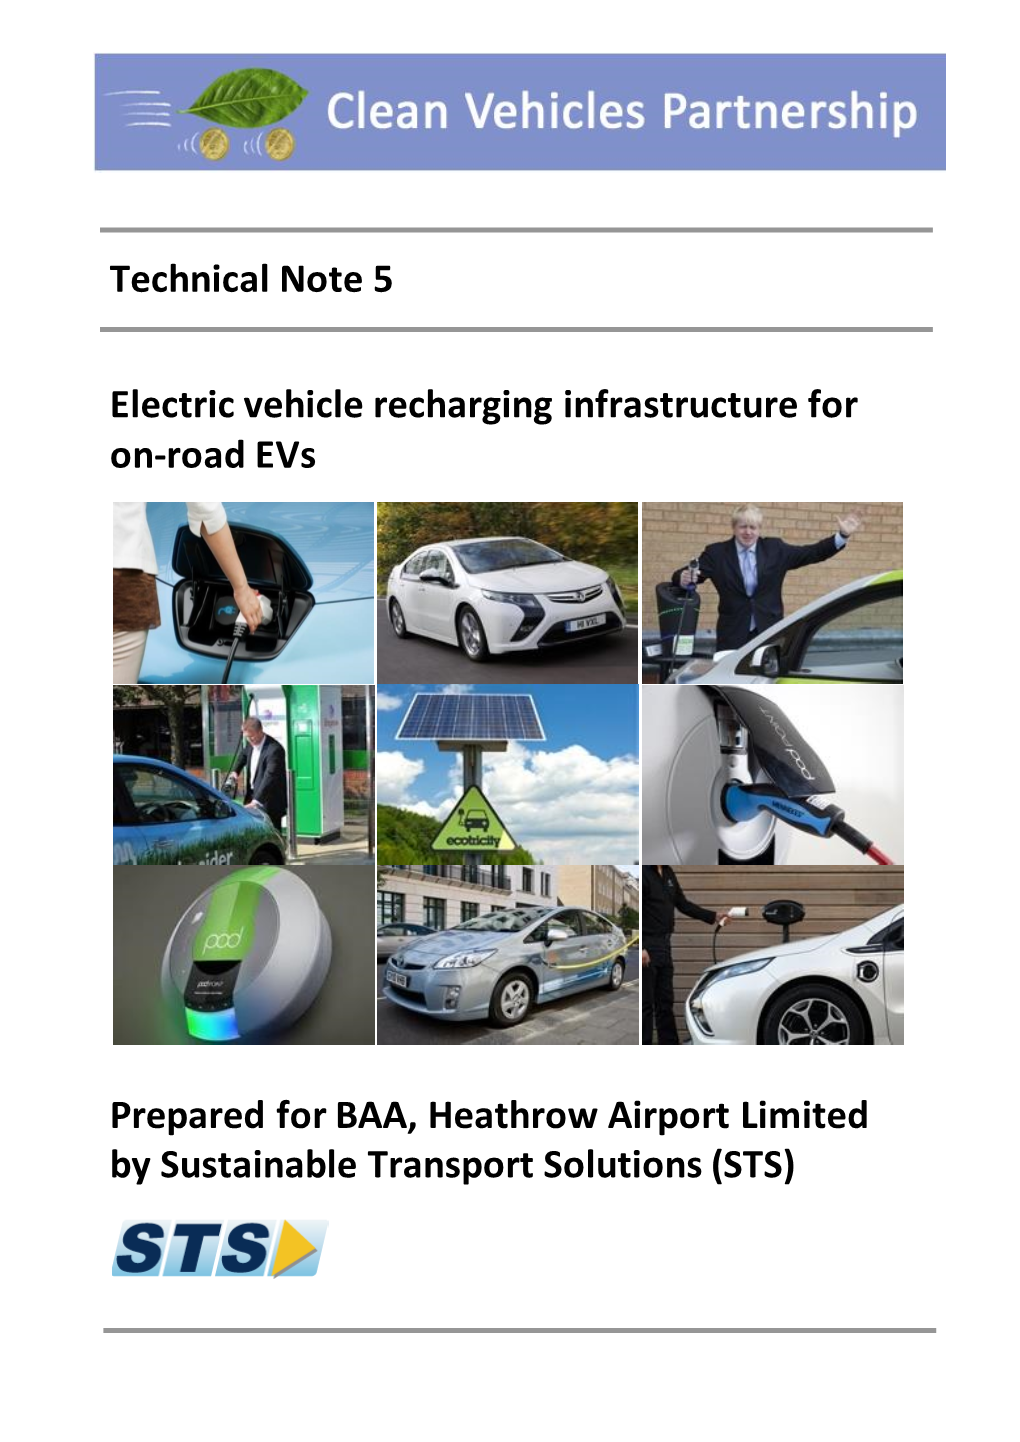 Technical Note 5 Electric Vehicle Recharging Infrastructure for On